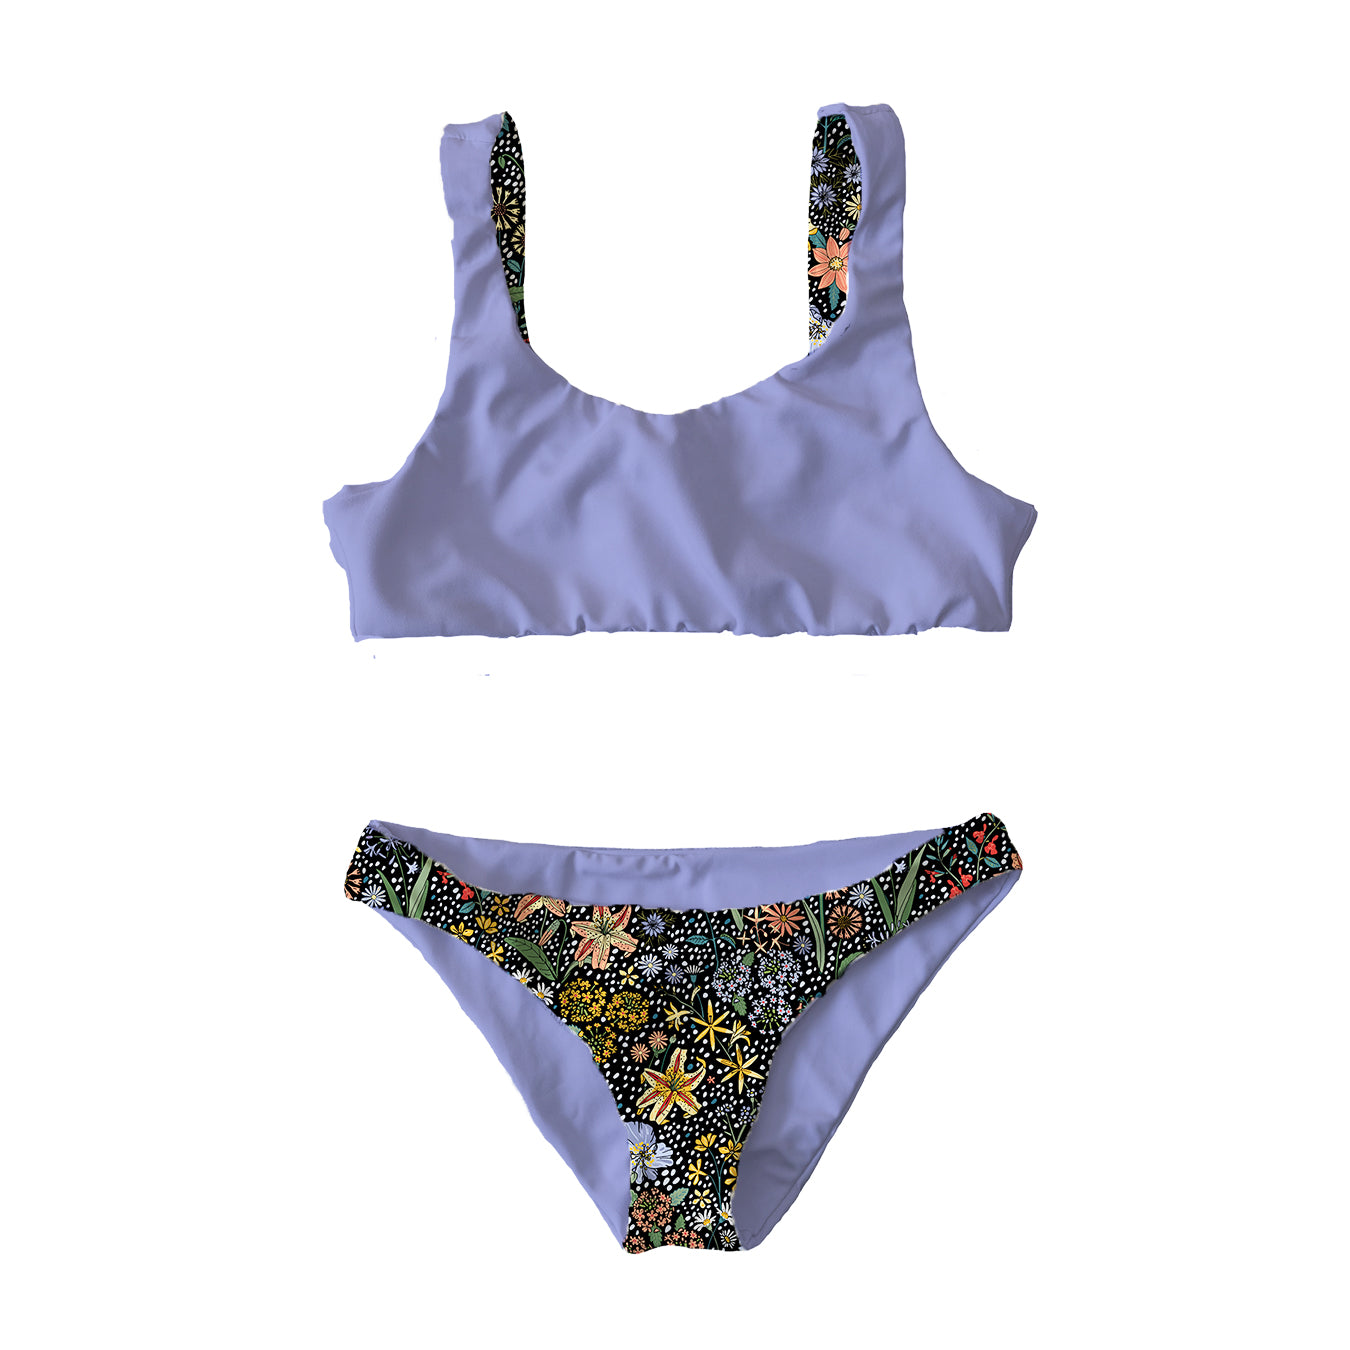 Reversible Bottom - Festive Floral / Solid Lilac